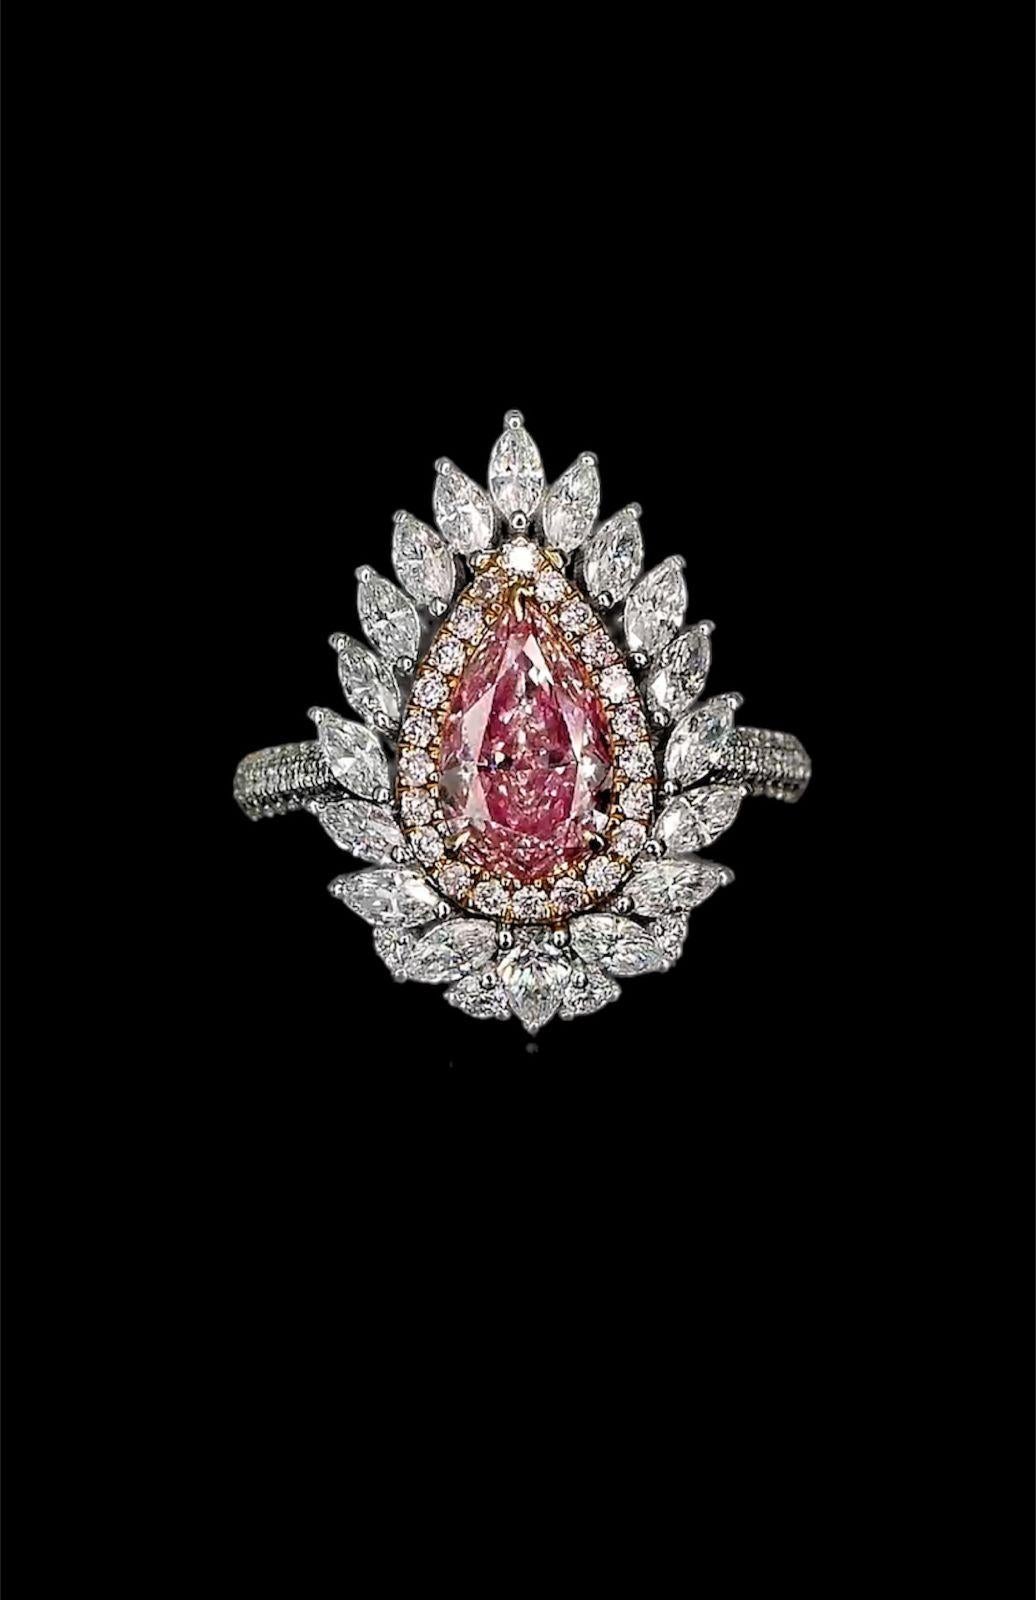 **100% NATURAL FANCY COLOUR DIAMOND JEWELRY**

✪ Jewelry Details ✪

♦ MAIN STONE DETAILS

➛ Stone Shape: Pear
➛ Stone Color: Fancy pink
➛ Stone Clarity: SI
➛ Stone Weight: 1.01 carats
➛ AGL certified

♦ SIDE STONE DETAILS

➛ Side white diamonds - 66